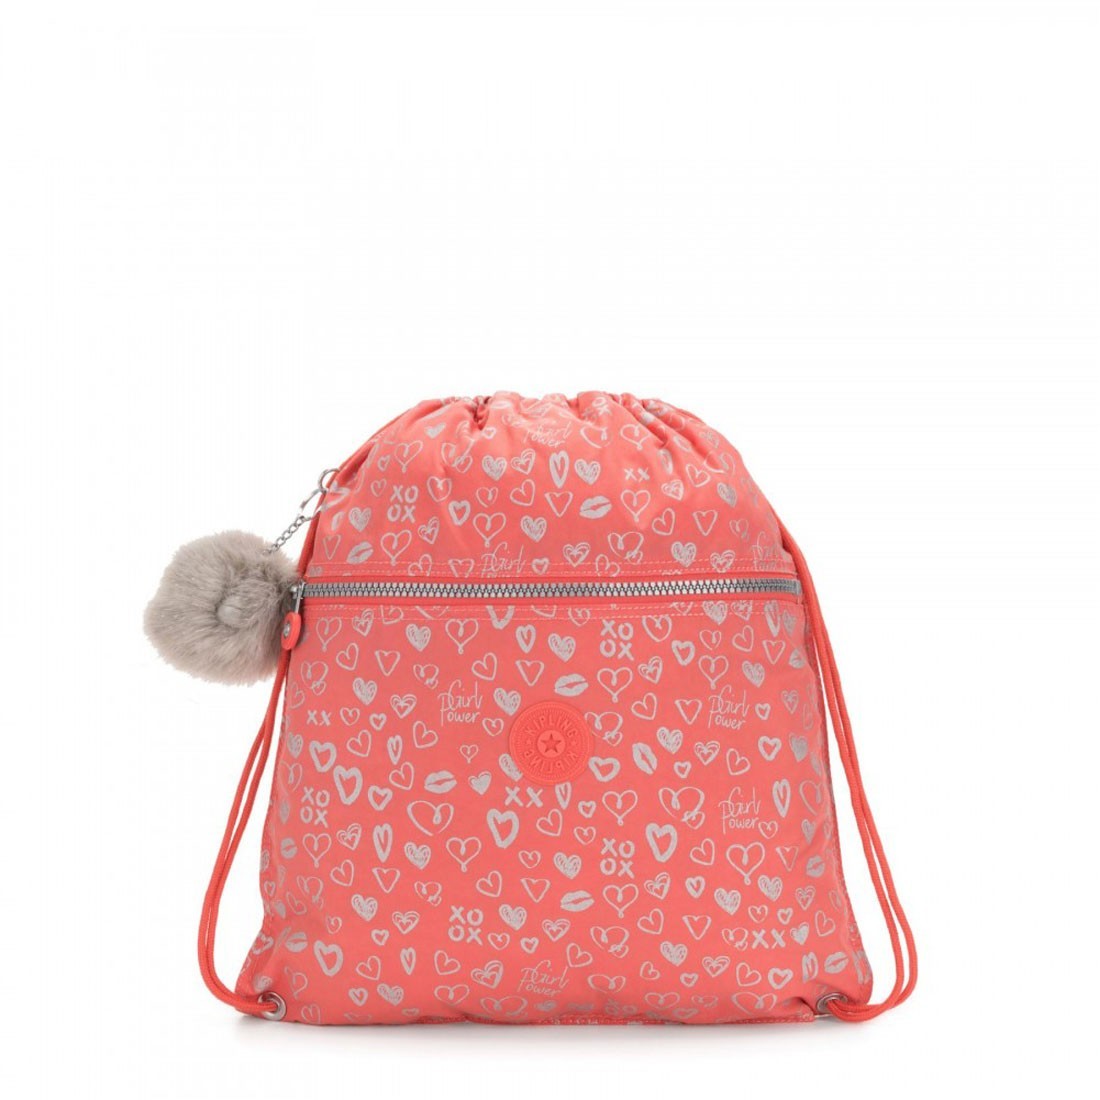 Buy Kipling Supertaboo Kid's Sports Bag - Hearty Pink Met - Kipling,  delivered to your home | The Outfit